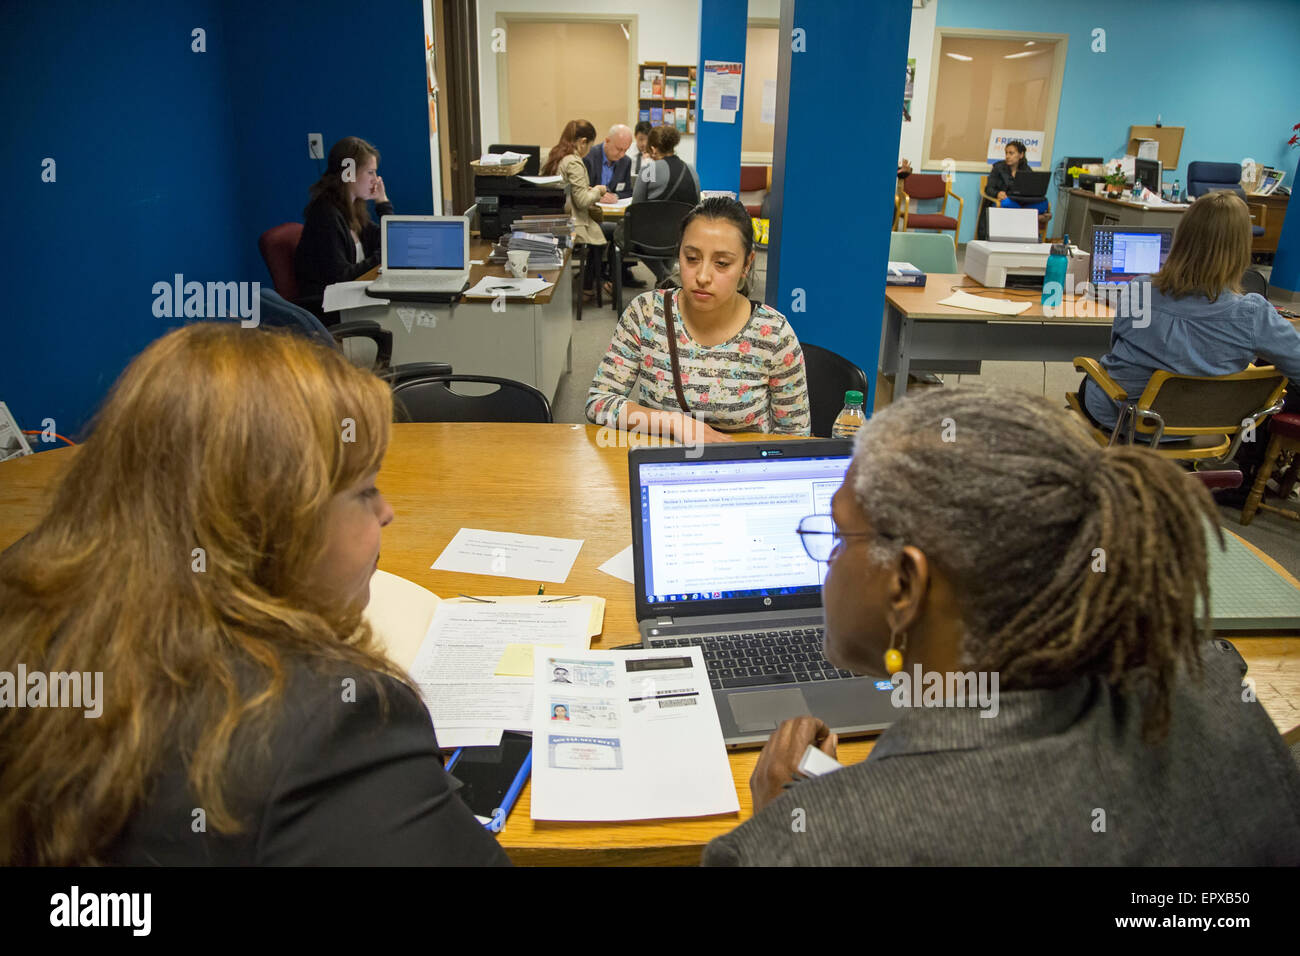 Detroit, Michigan - Counselors help immigrants with their applications for U.S. citizenship. Stock Photo